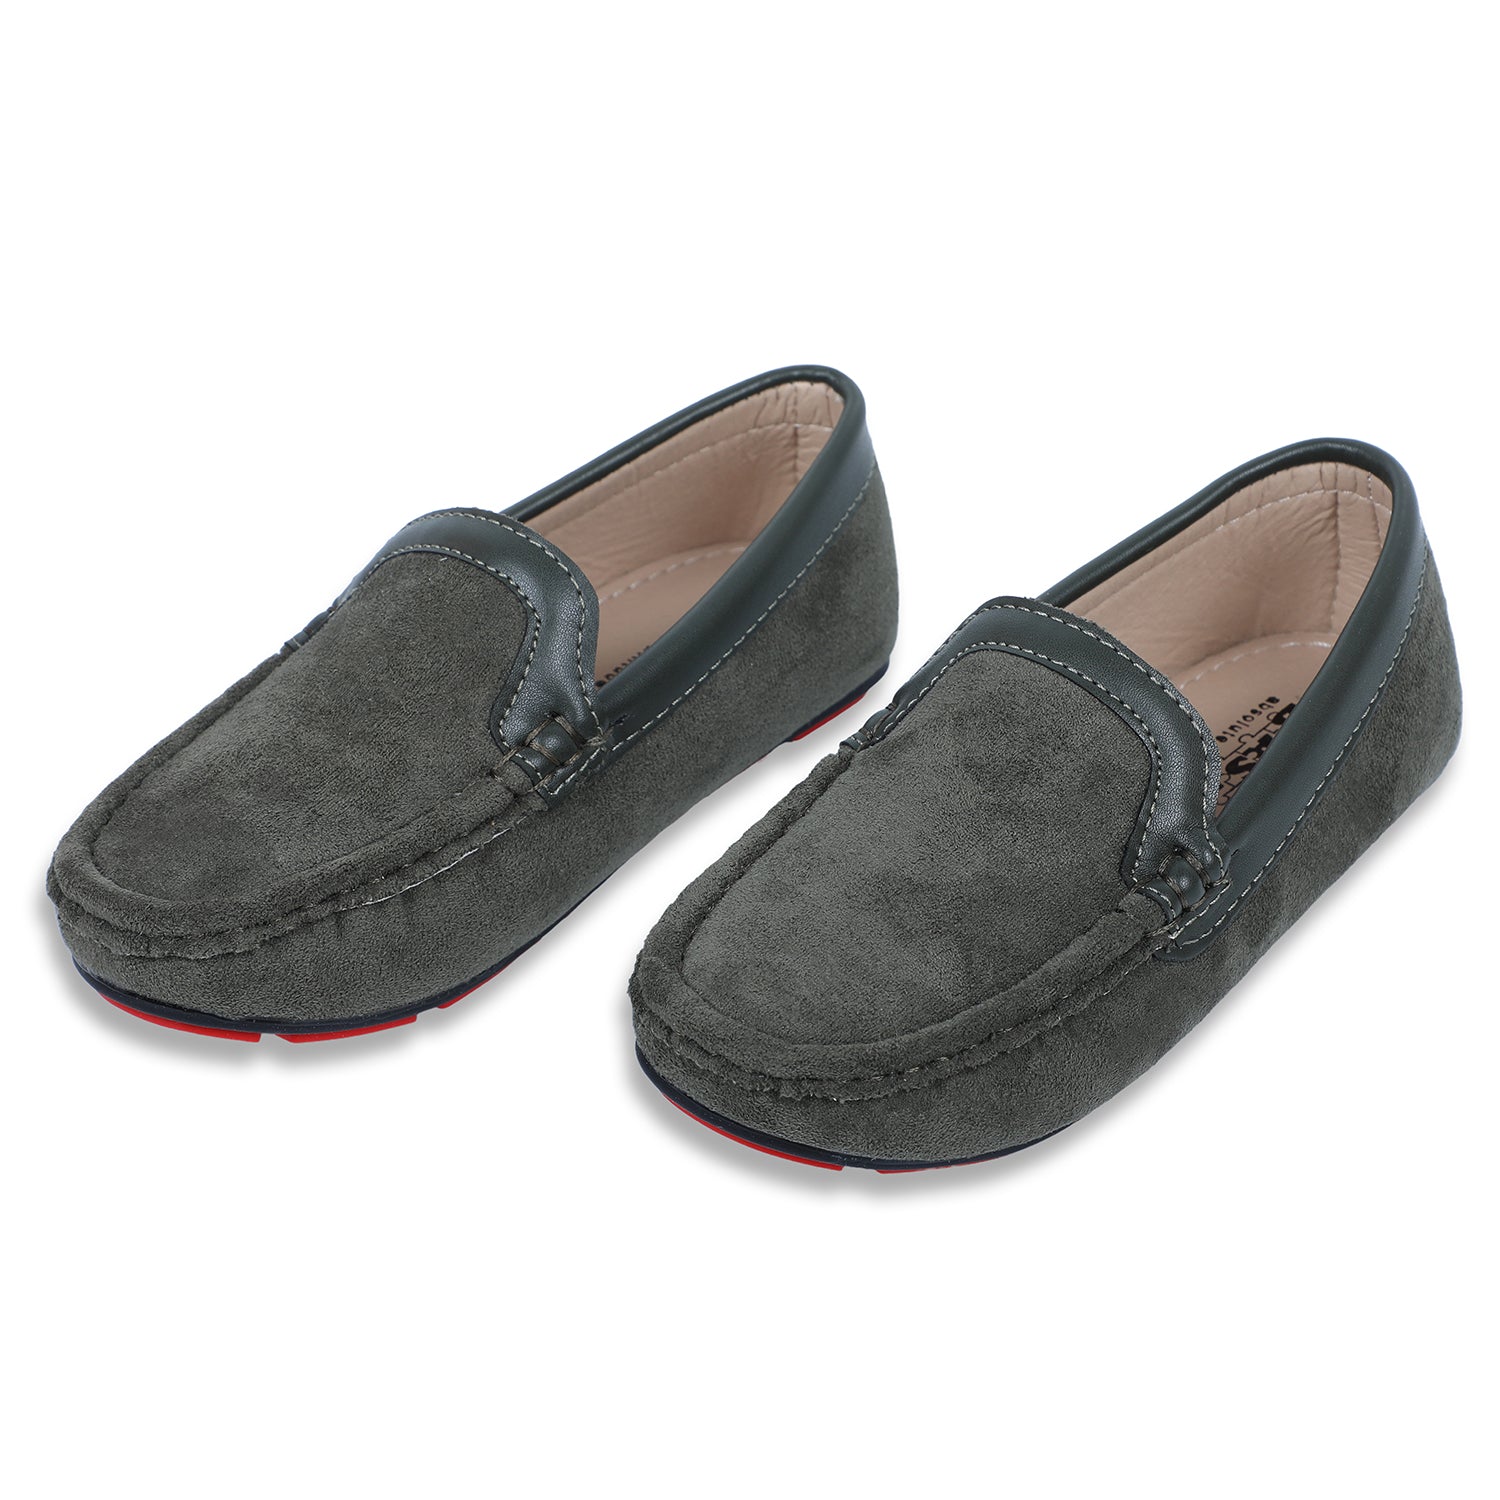 Baby Moo x Bash Kids Suede Loafer Shoes - Dark Green